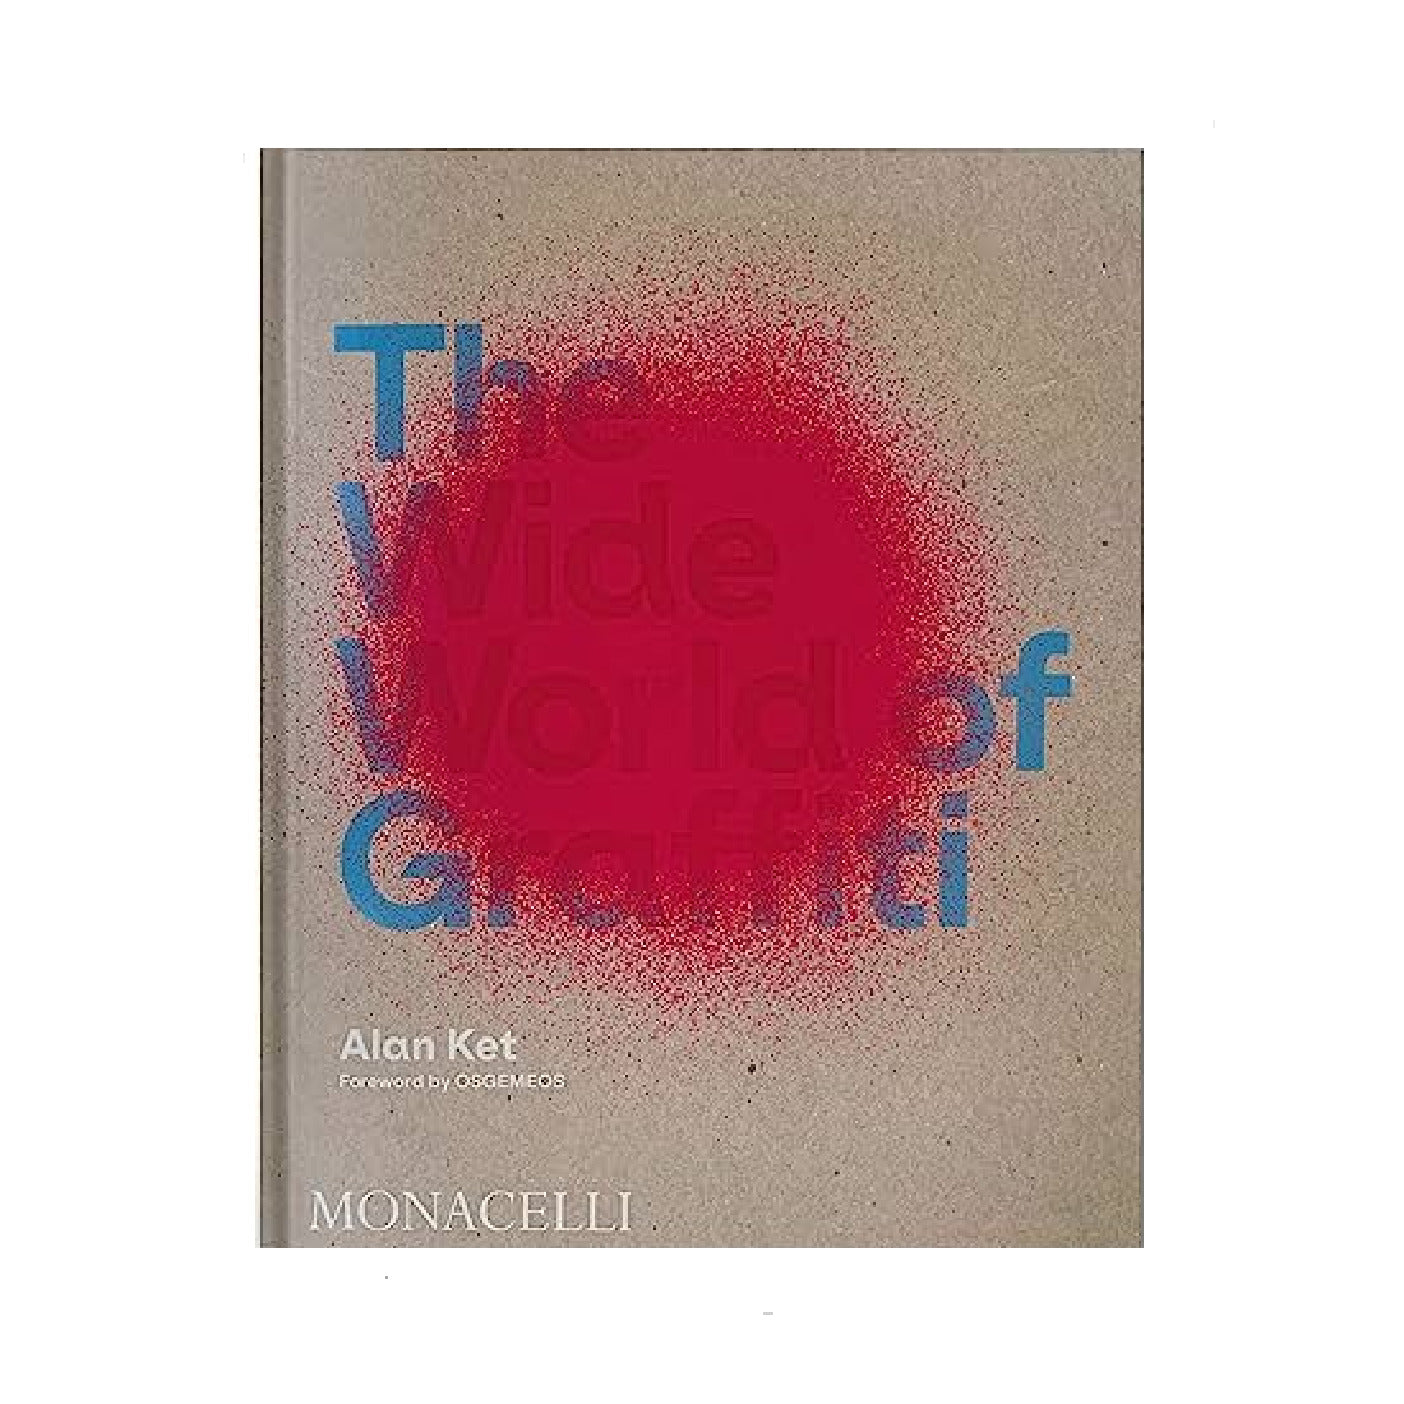 The Wide World of Graffiti - Signed